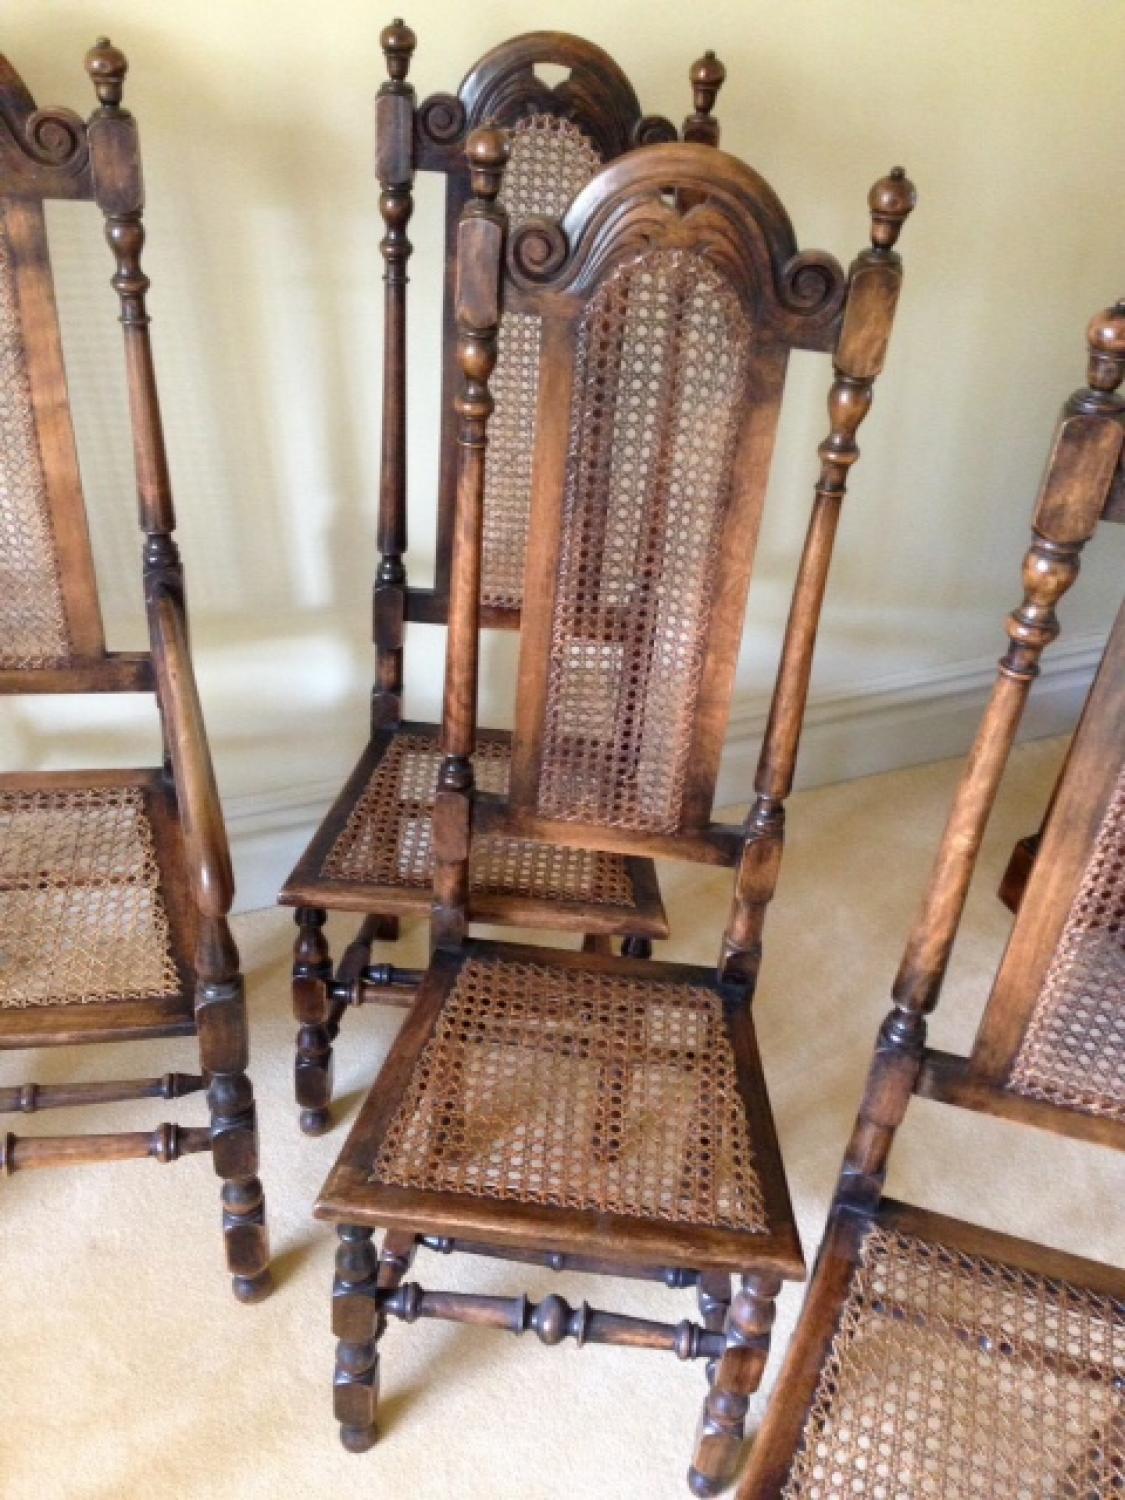 Set of 8 Dining Room Chairs